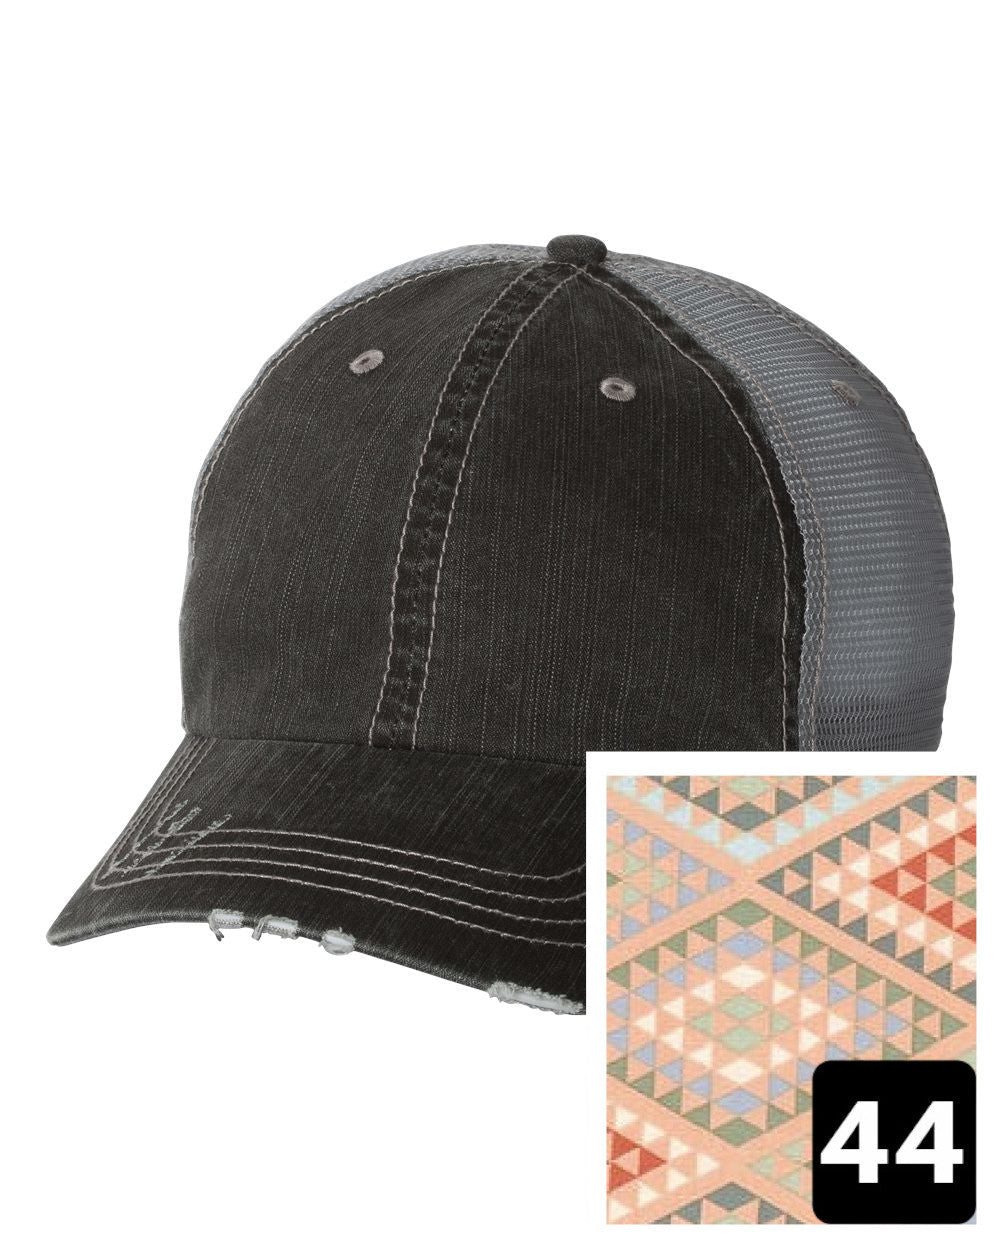 gray distressed trucker hat with navy coral and white chevron fabric state of Nevada